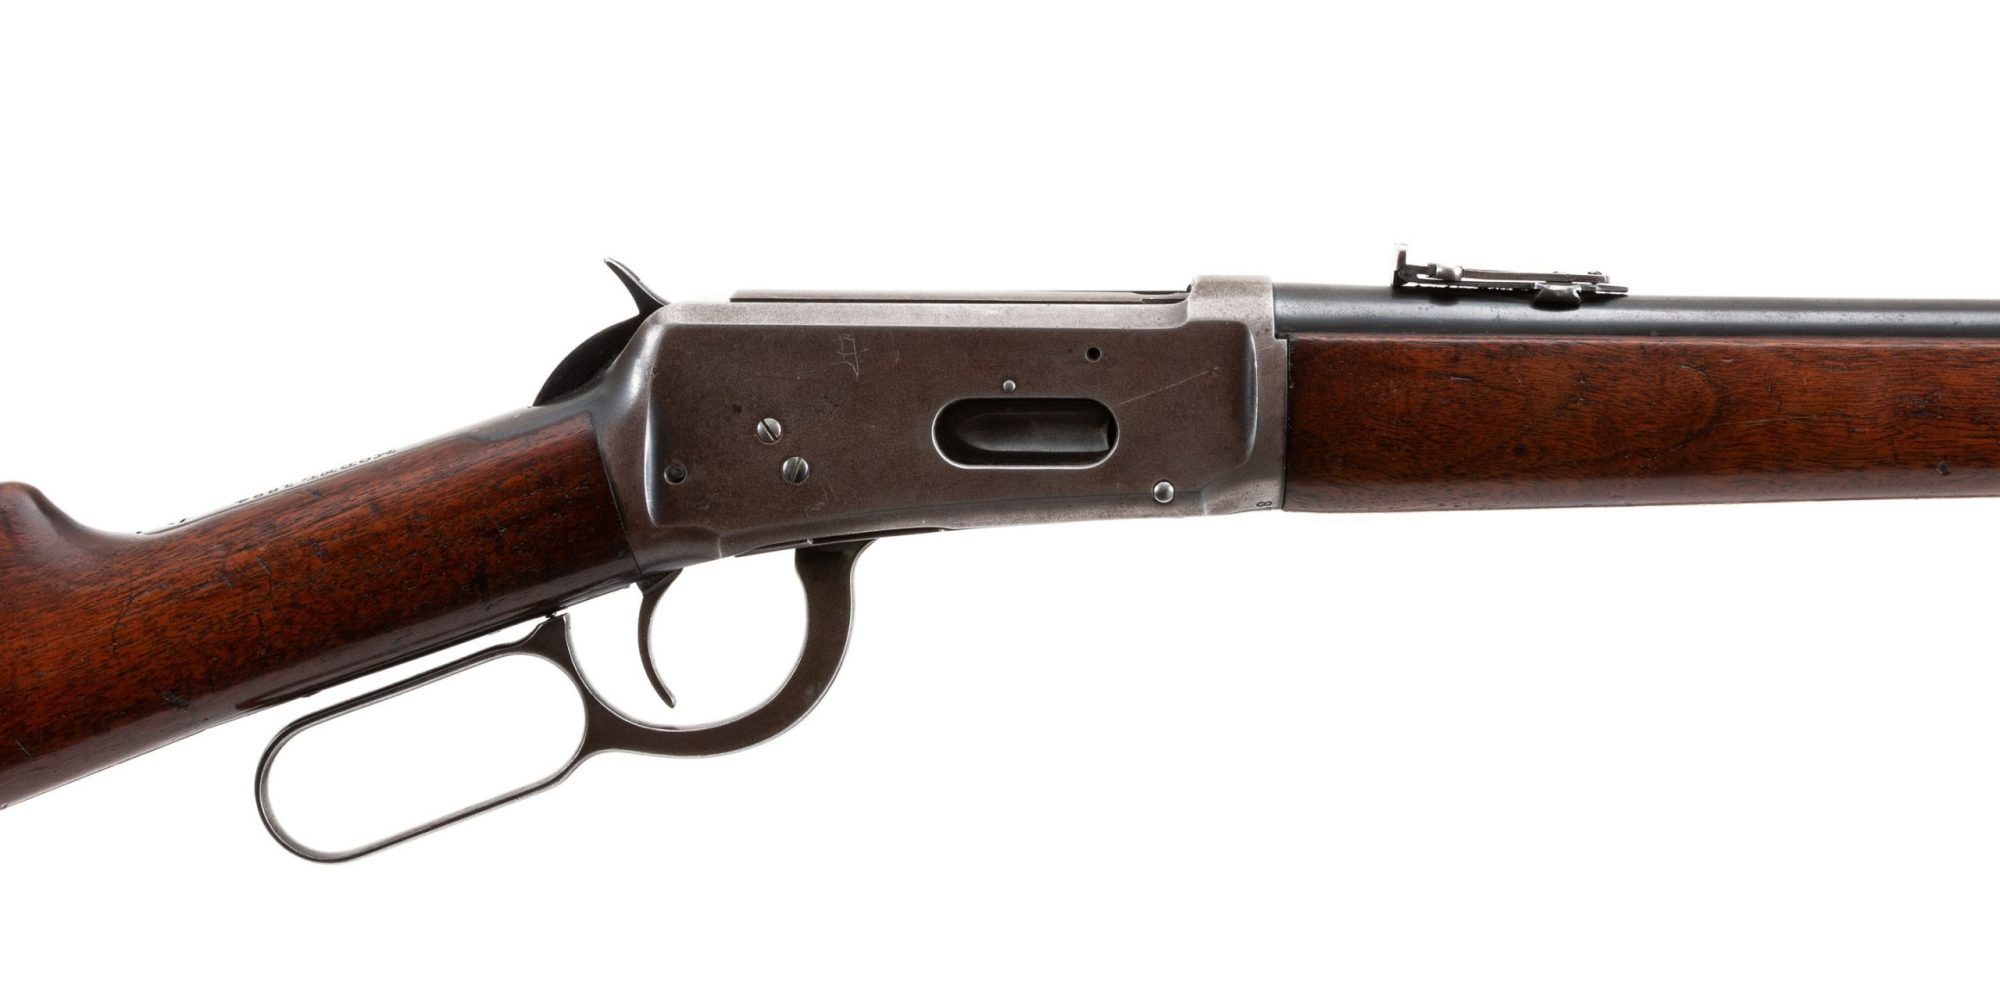 Photo of a pre-owned Winchester Model 1894 SRC from 1920, for sale by Turnbull Restoration of Bloomfield, NY